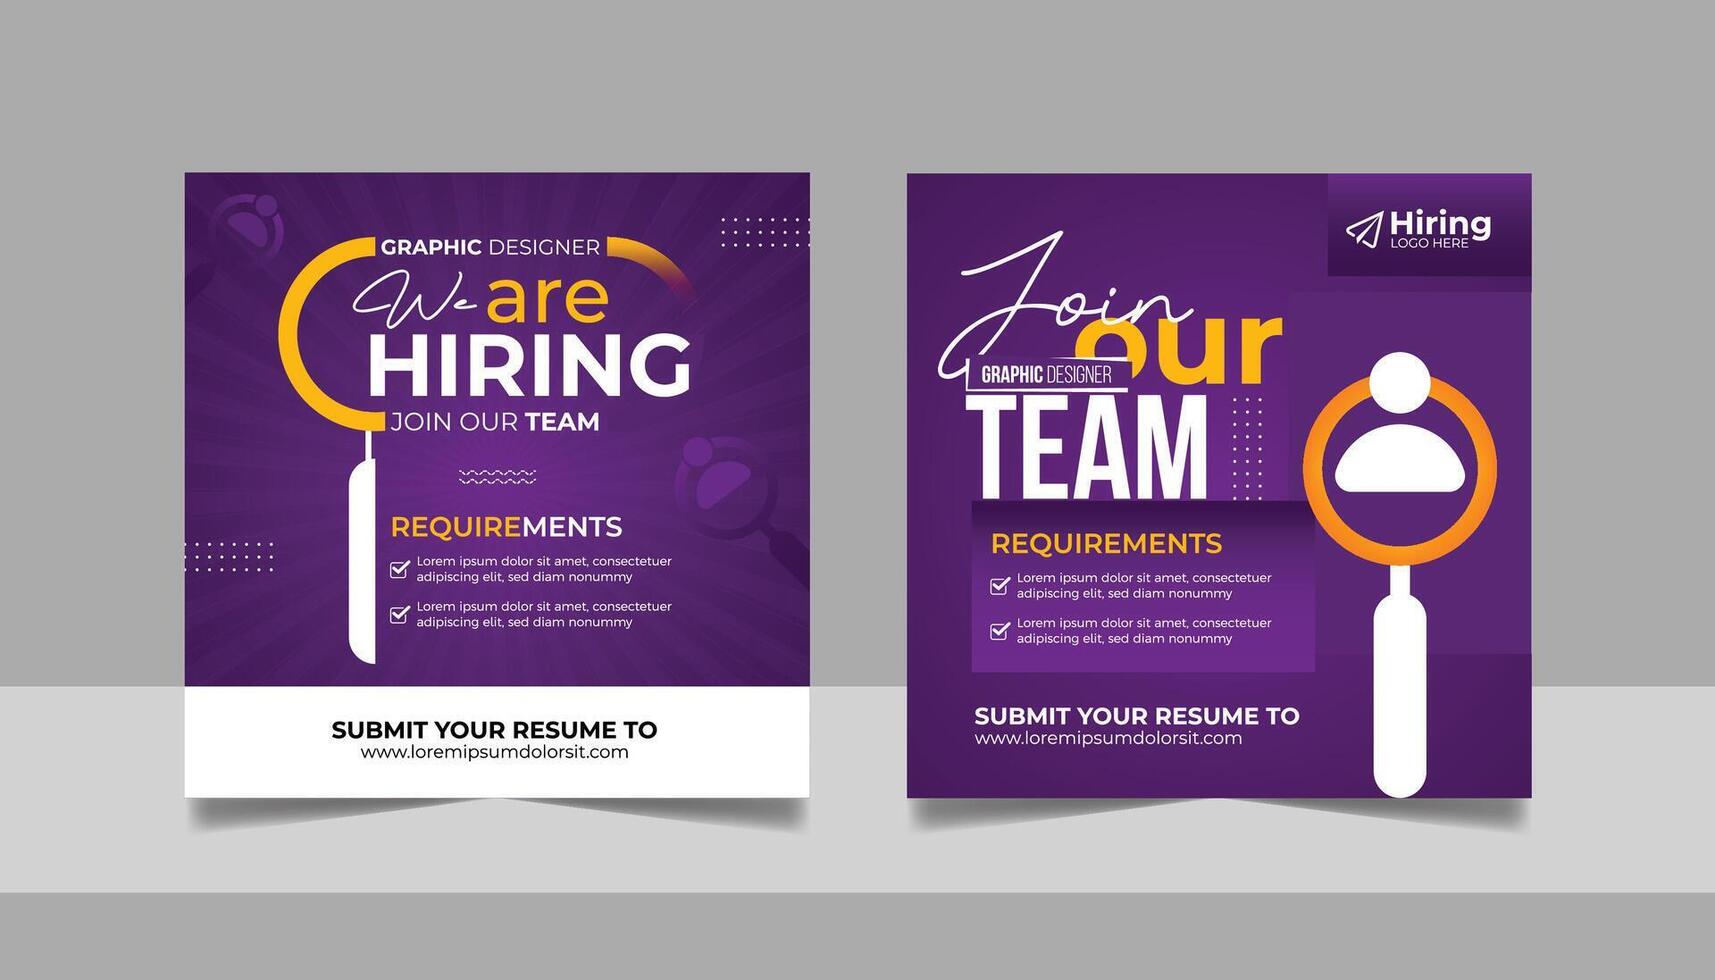 We are hiring job vacancy social media post template set, Vacant recruitment marketing banner square flyer, Join our team ads design, Job interview poster, Hire icon background. vector